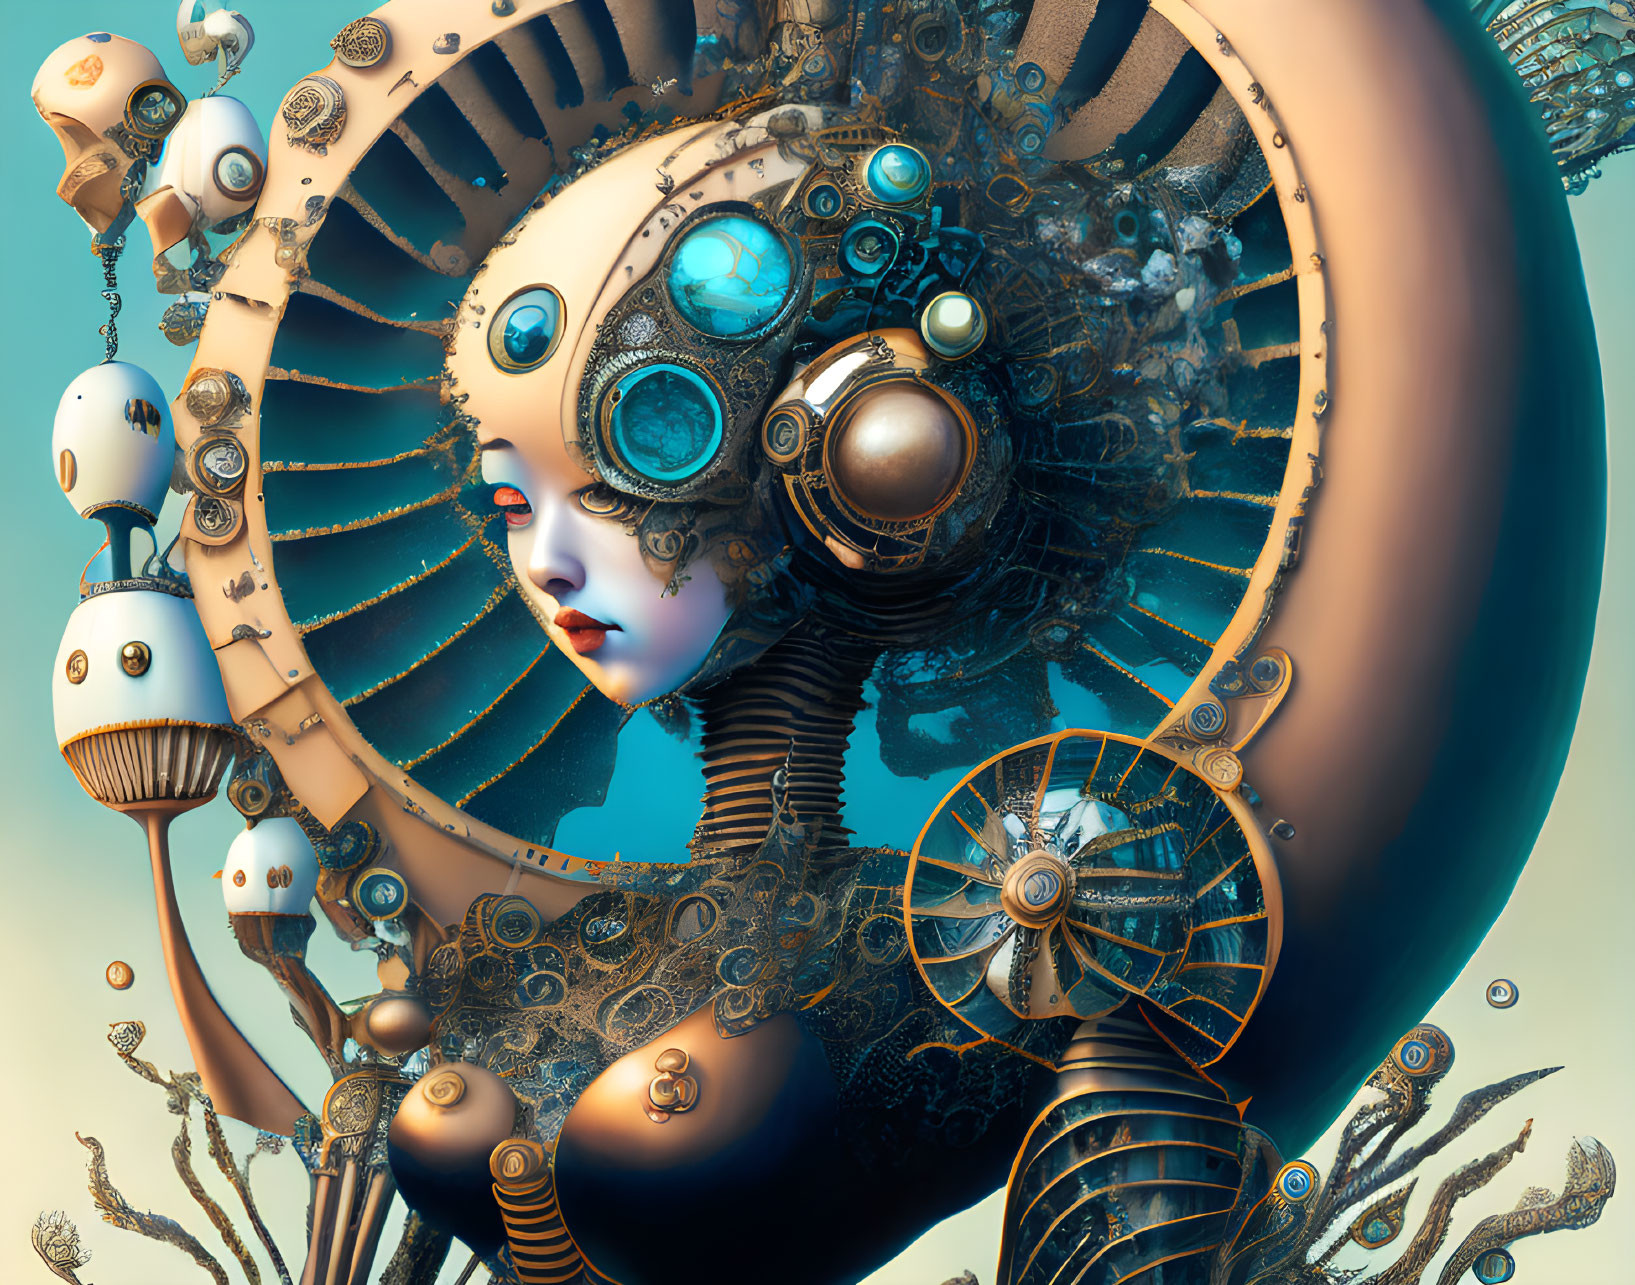 Surreal steampunk-style digital artwork with female figure and mechanical gear elements